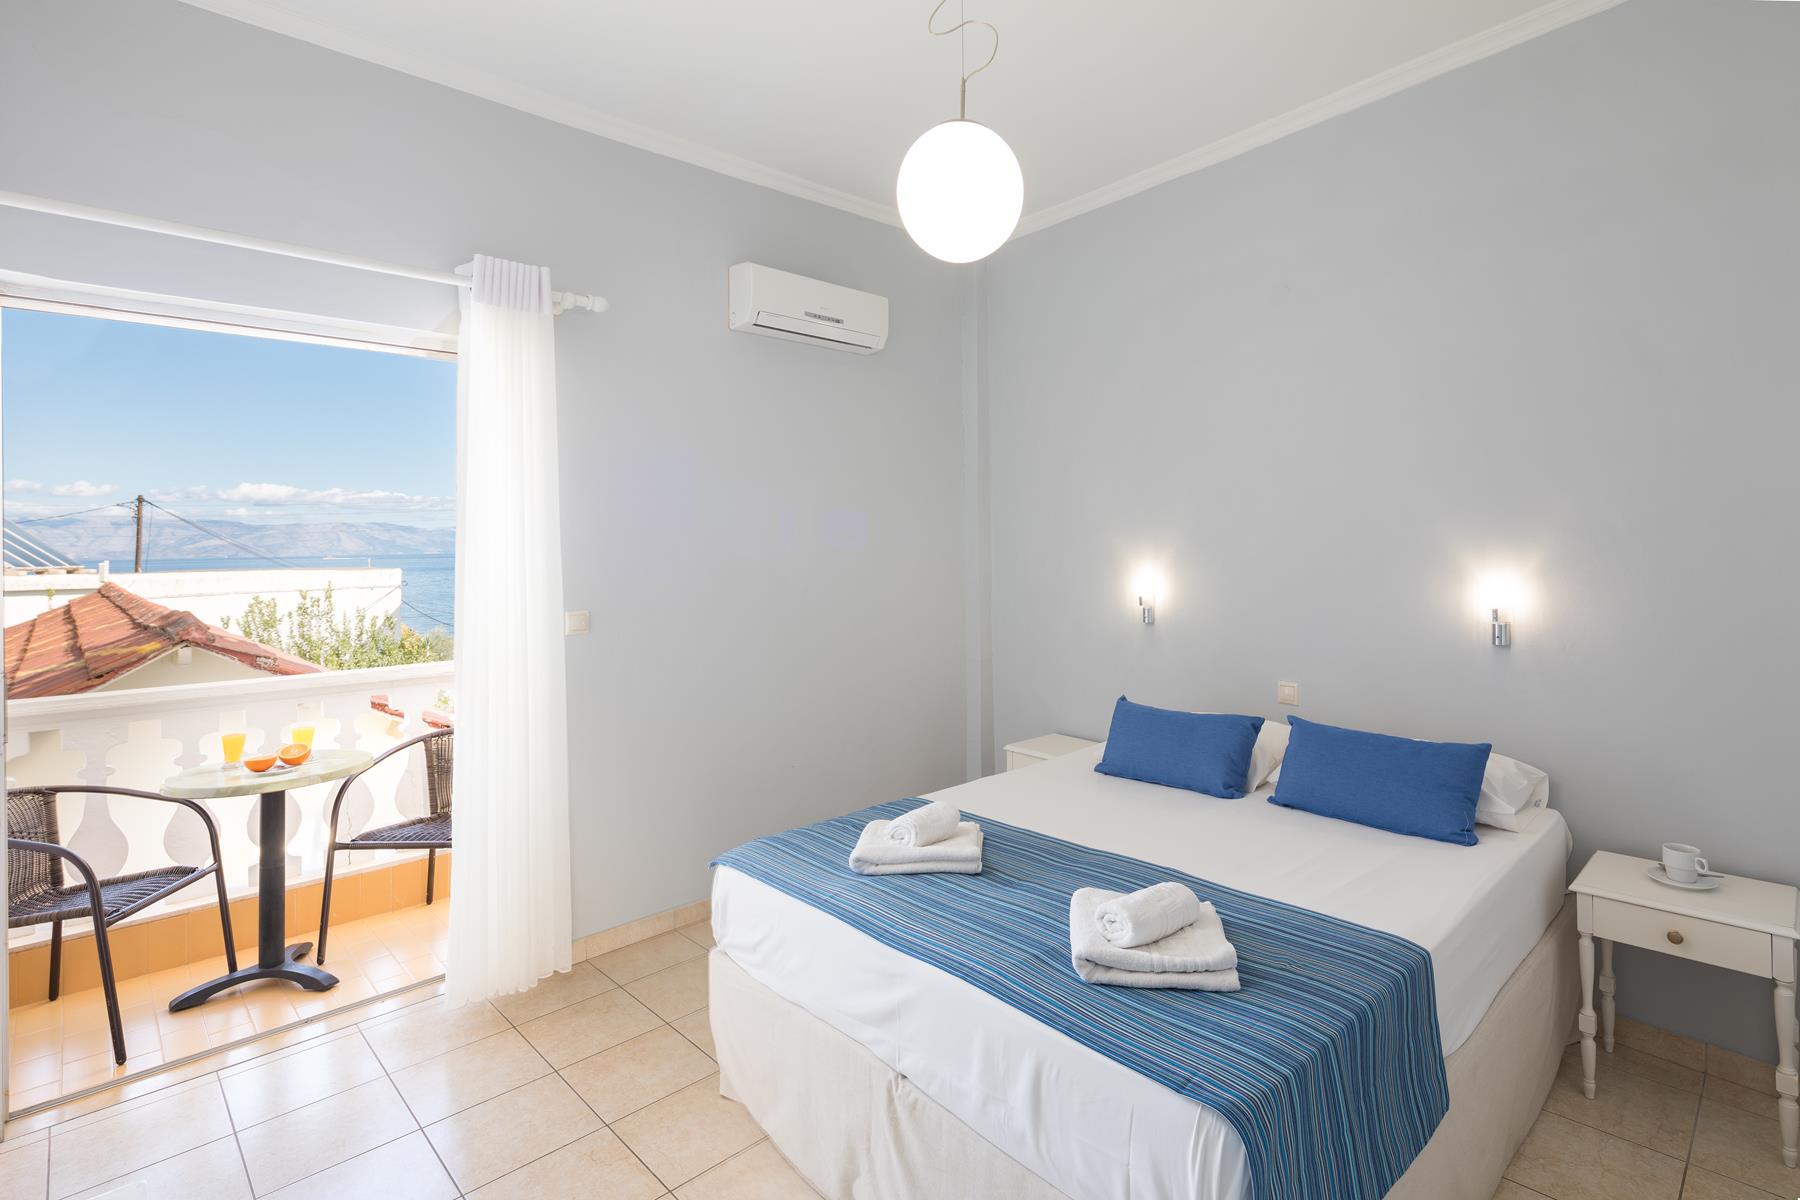 Accommodation for couple in Corfu